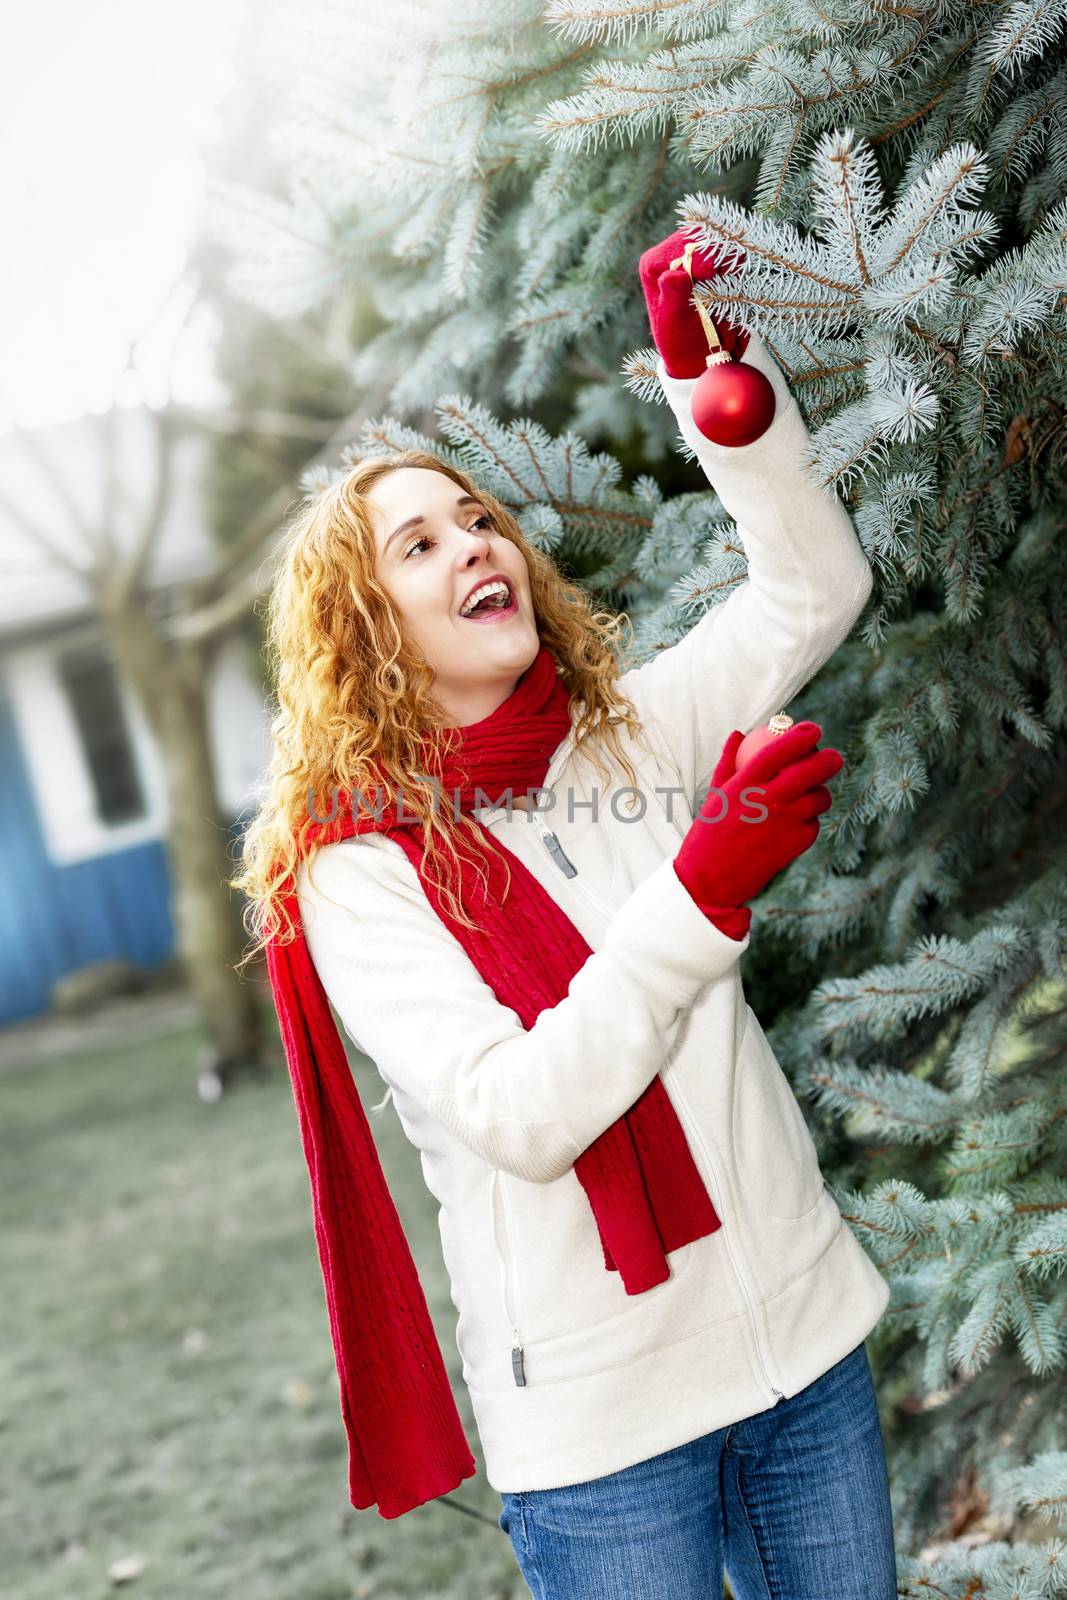 Woman decorating Christmas tree outside by elenathewise